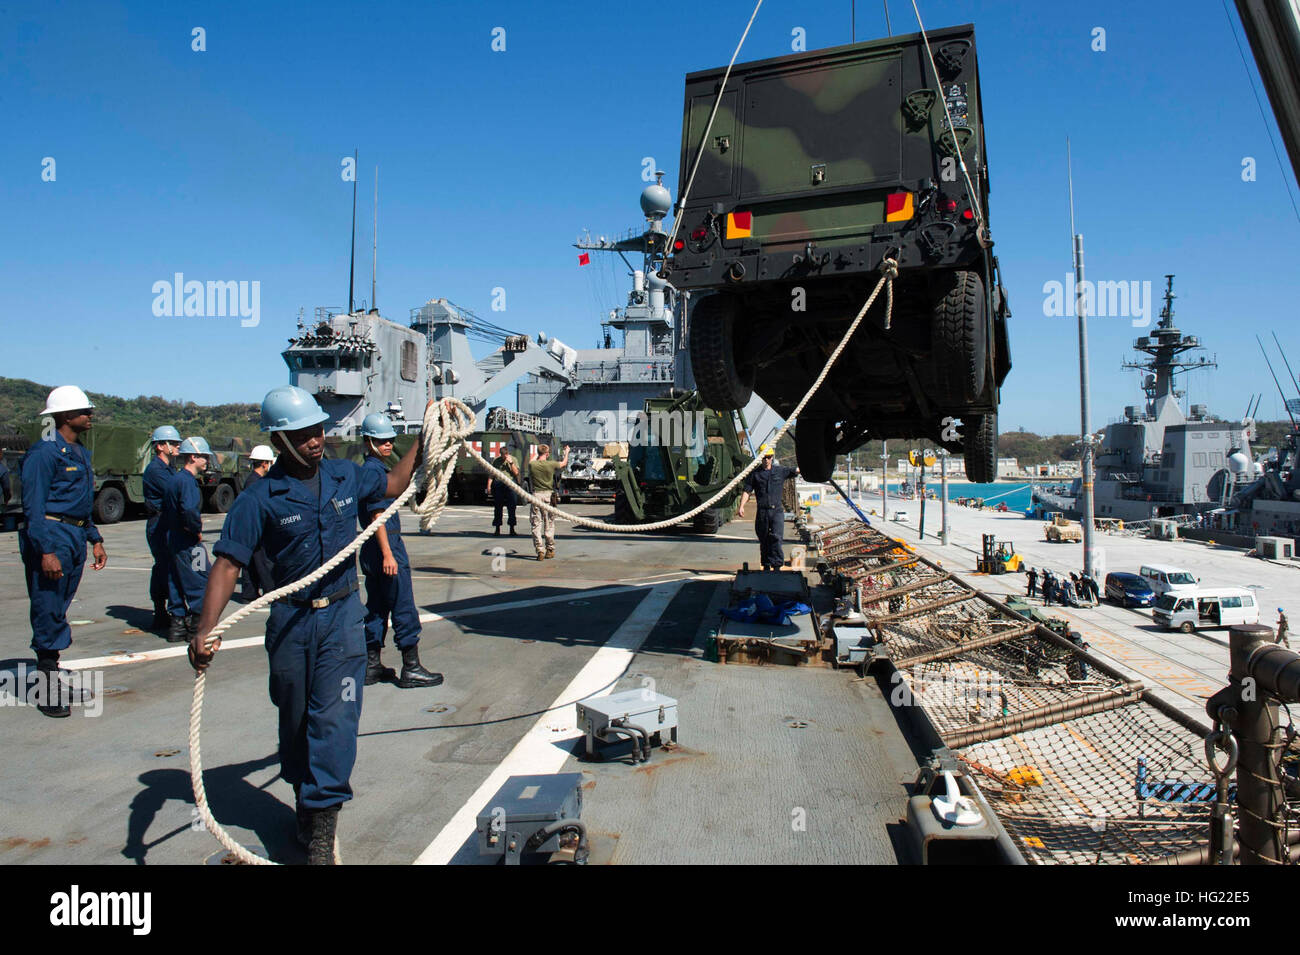 Sailors man tending lines as a crane hoists a Humvee, assigned to the 31st Marine Expeditionary Unit (MEU), off the flight deck of the amphibious dock landing ship USS Germantown (LSD 42) during an equipment offload in White Beach, Okinawa. Germantown is part of the Peleliu Amphibious Ready Group, commanded by Capt. Heidi Agle, and is conducting joint forces exercises in the U.S. 7th Fleet area of responsibility.  (U.S. Navy Photo by Mass Communication Specialist 2nd Class Amanda R. Gray/Released) USS Germantown 141021-N-UD469-134 Stock Photo